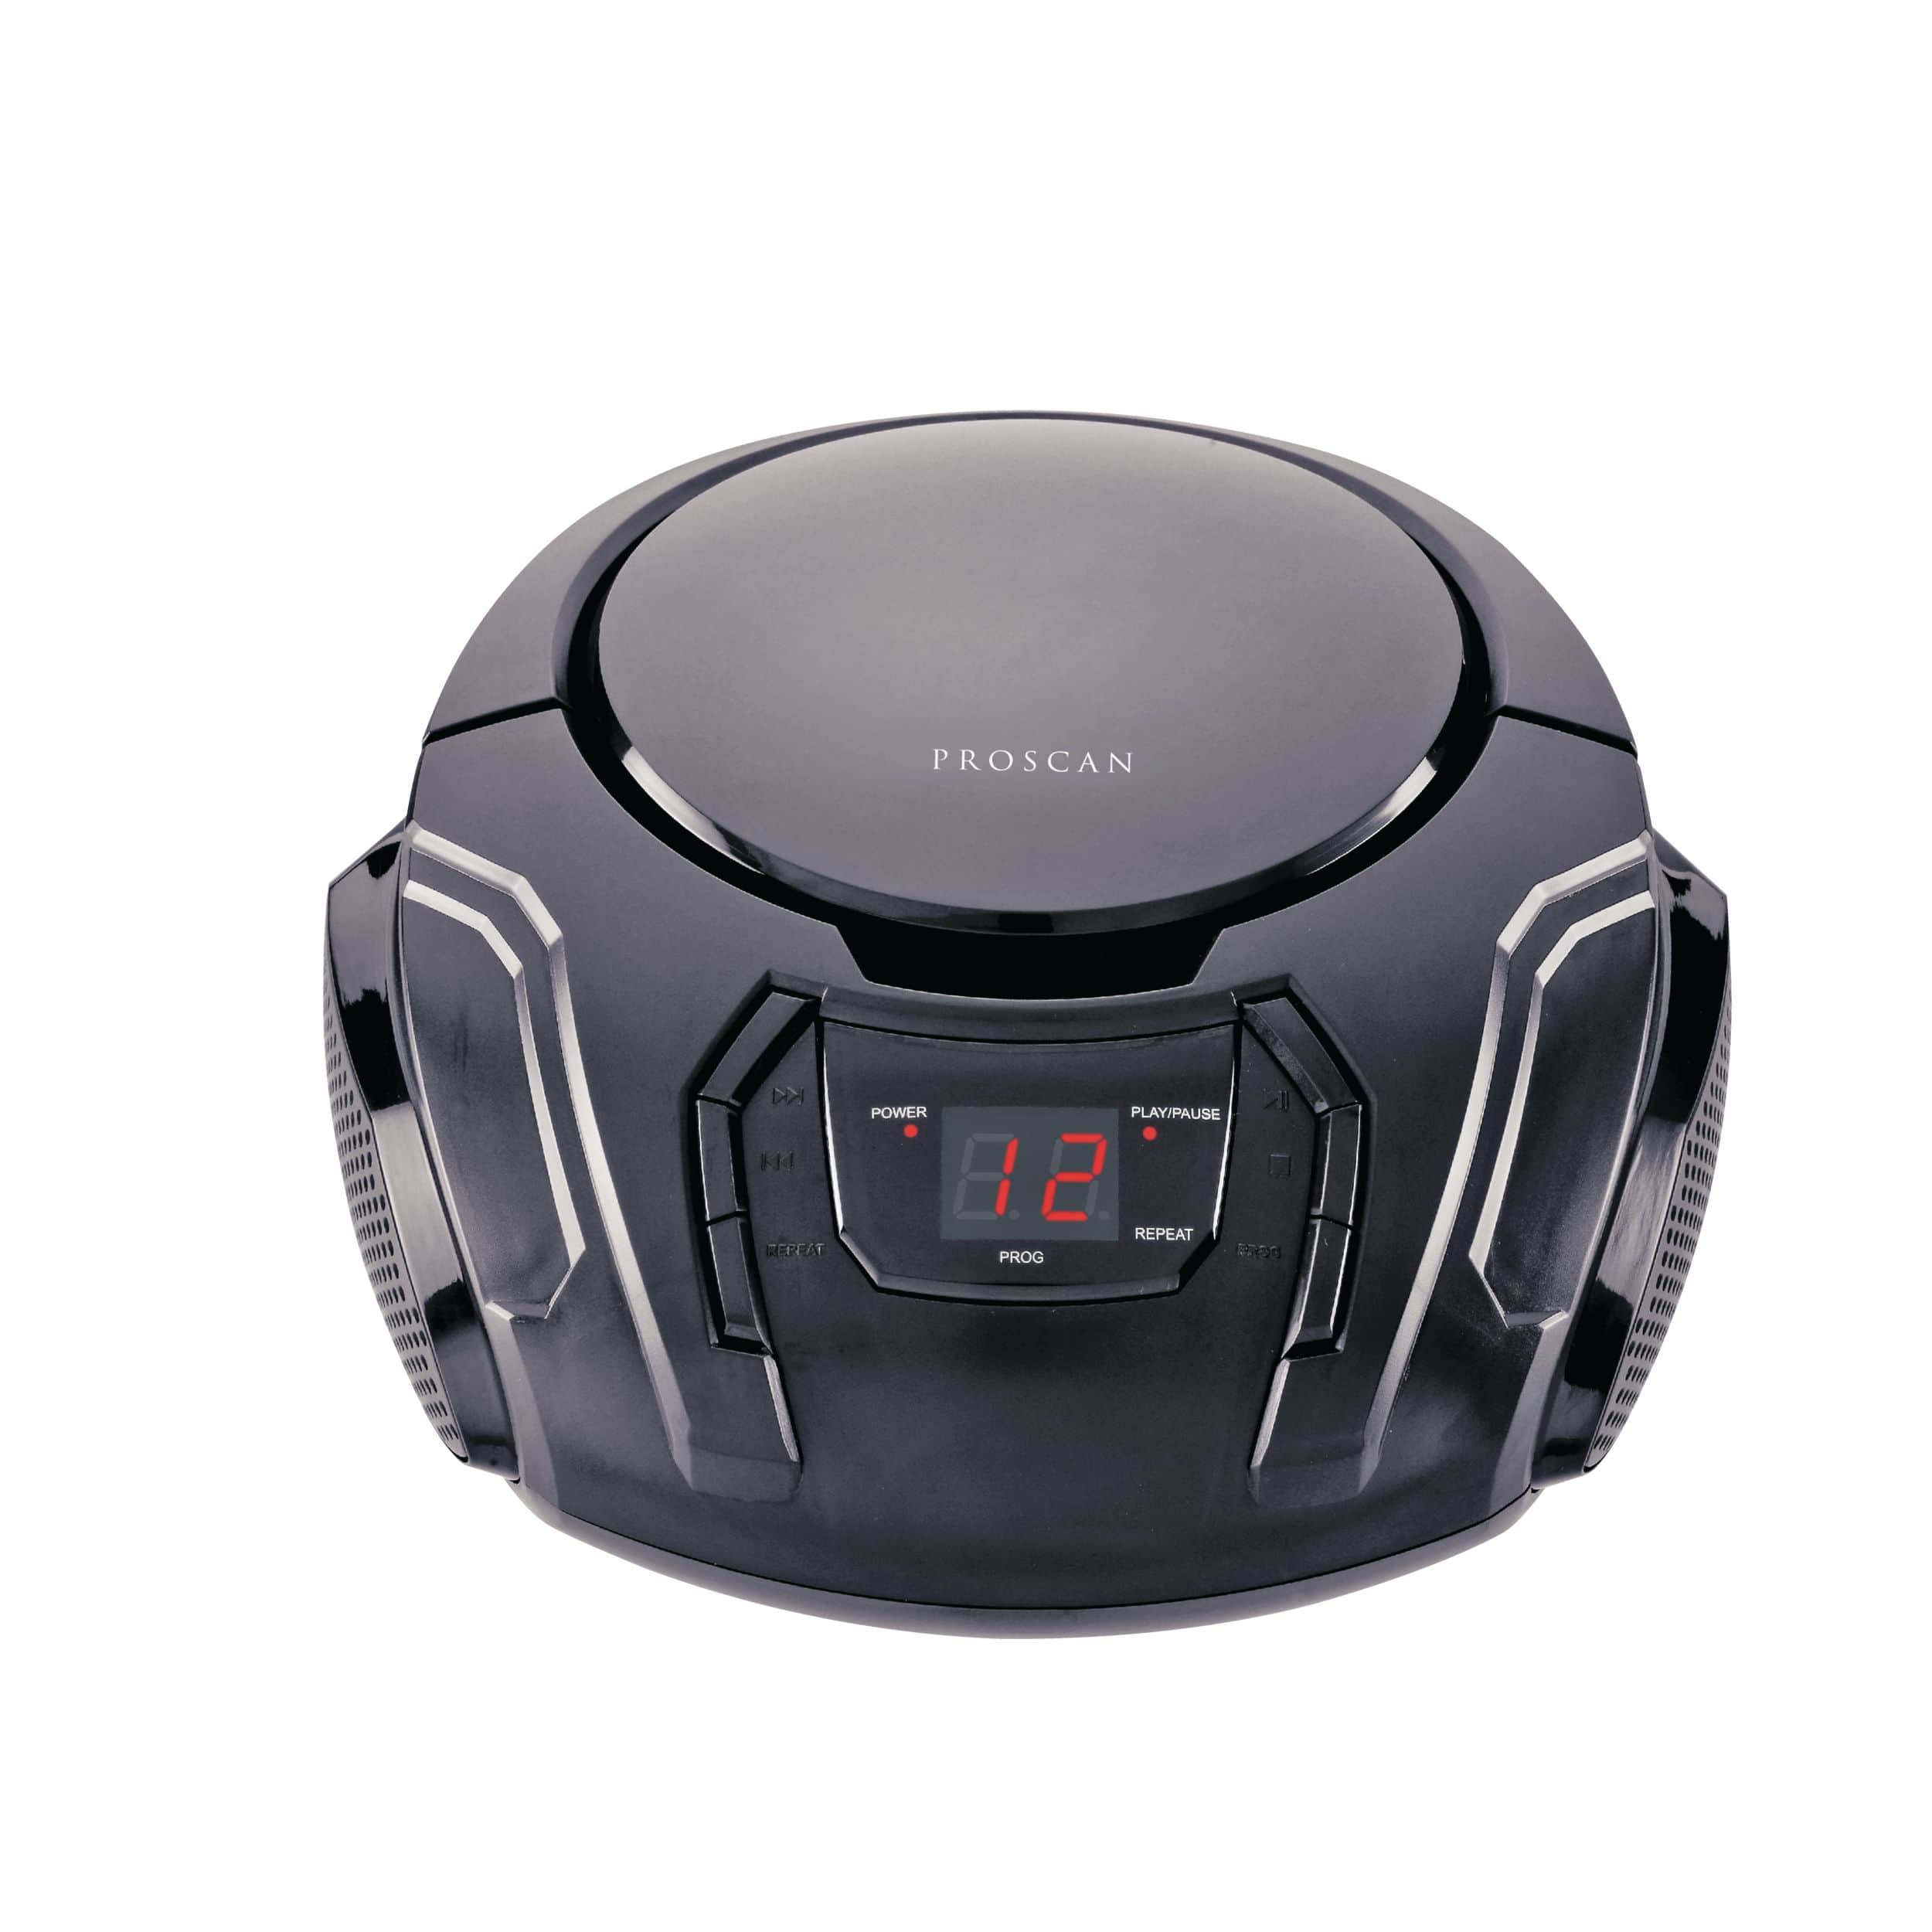 Proscan SRCD261B-BLK Portable CD Player Boombox Stereo w/ AM/FM Radio &  AUX-IN